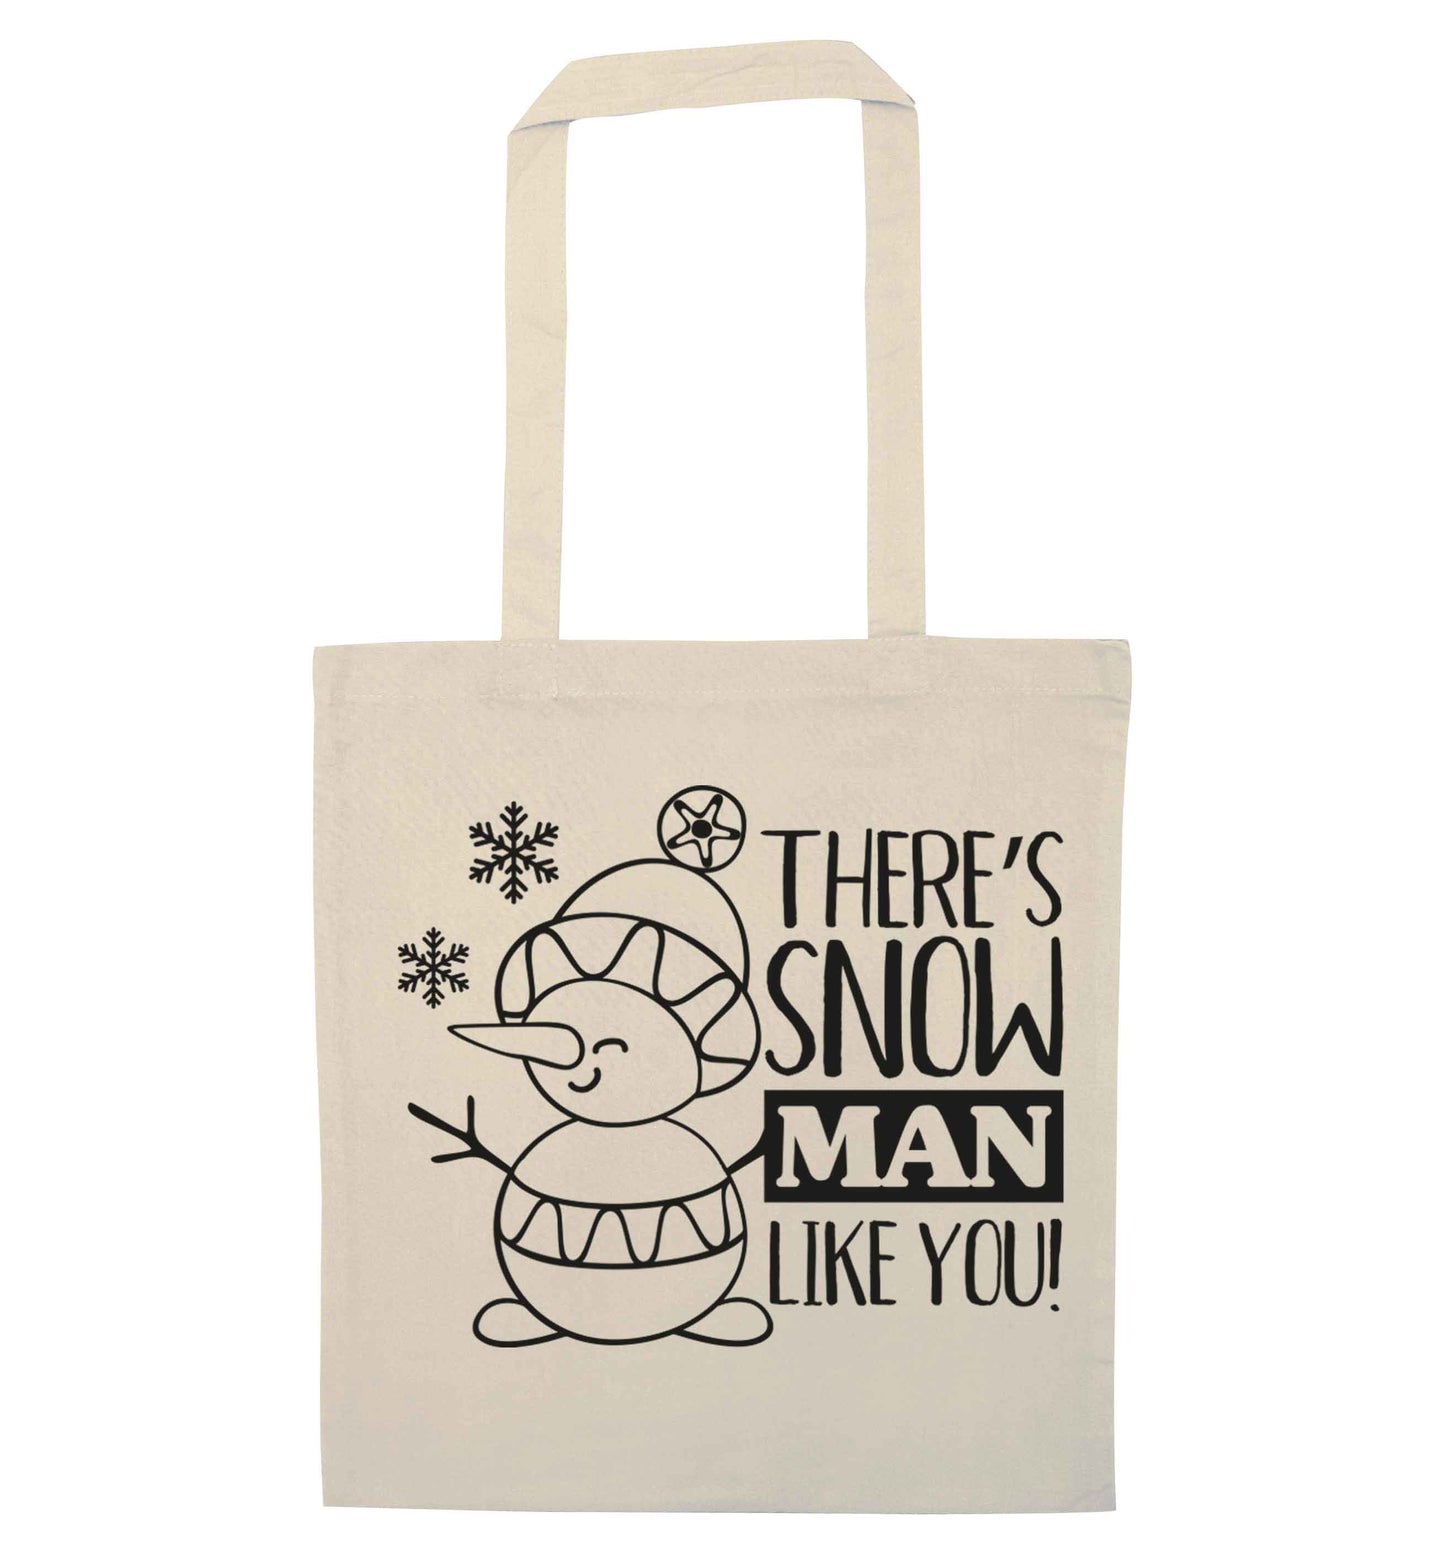 There's snow man like you natural tote bag